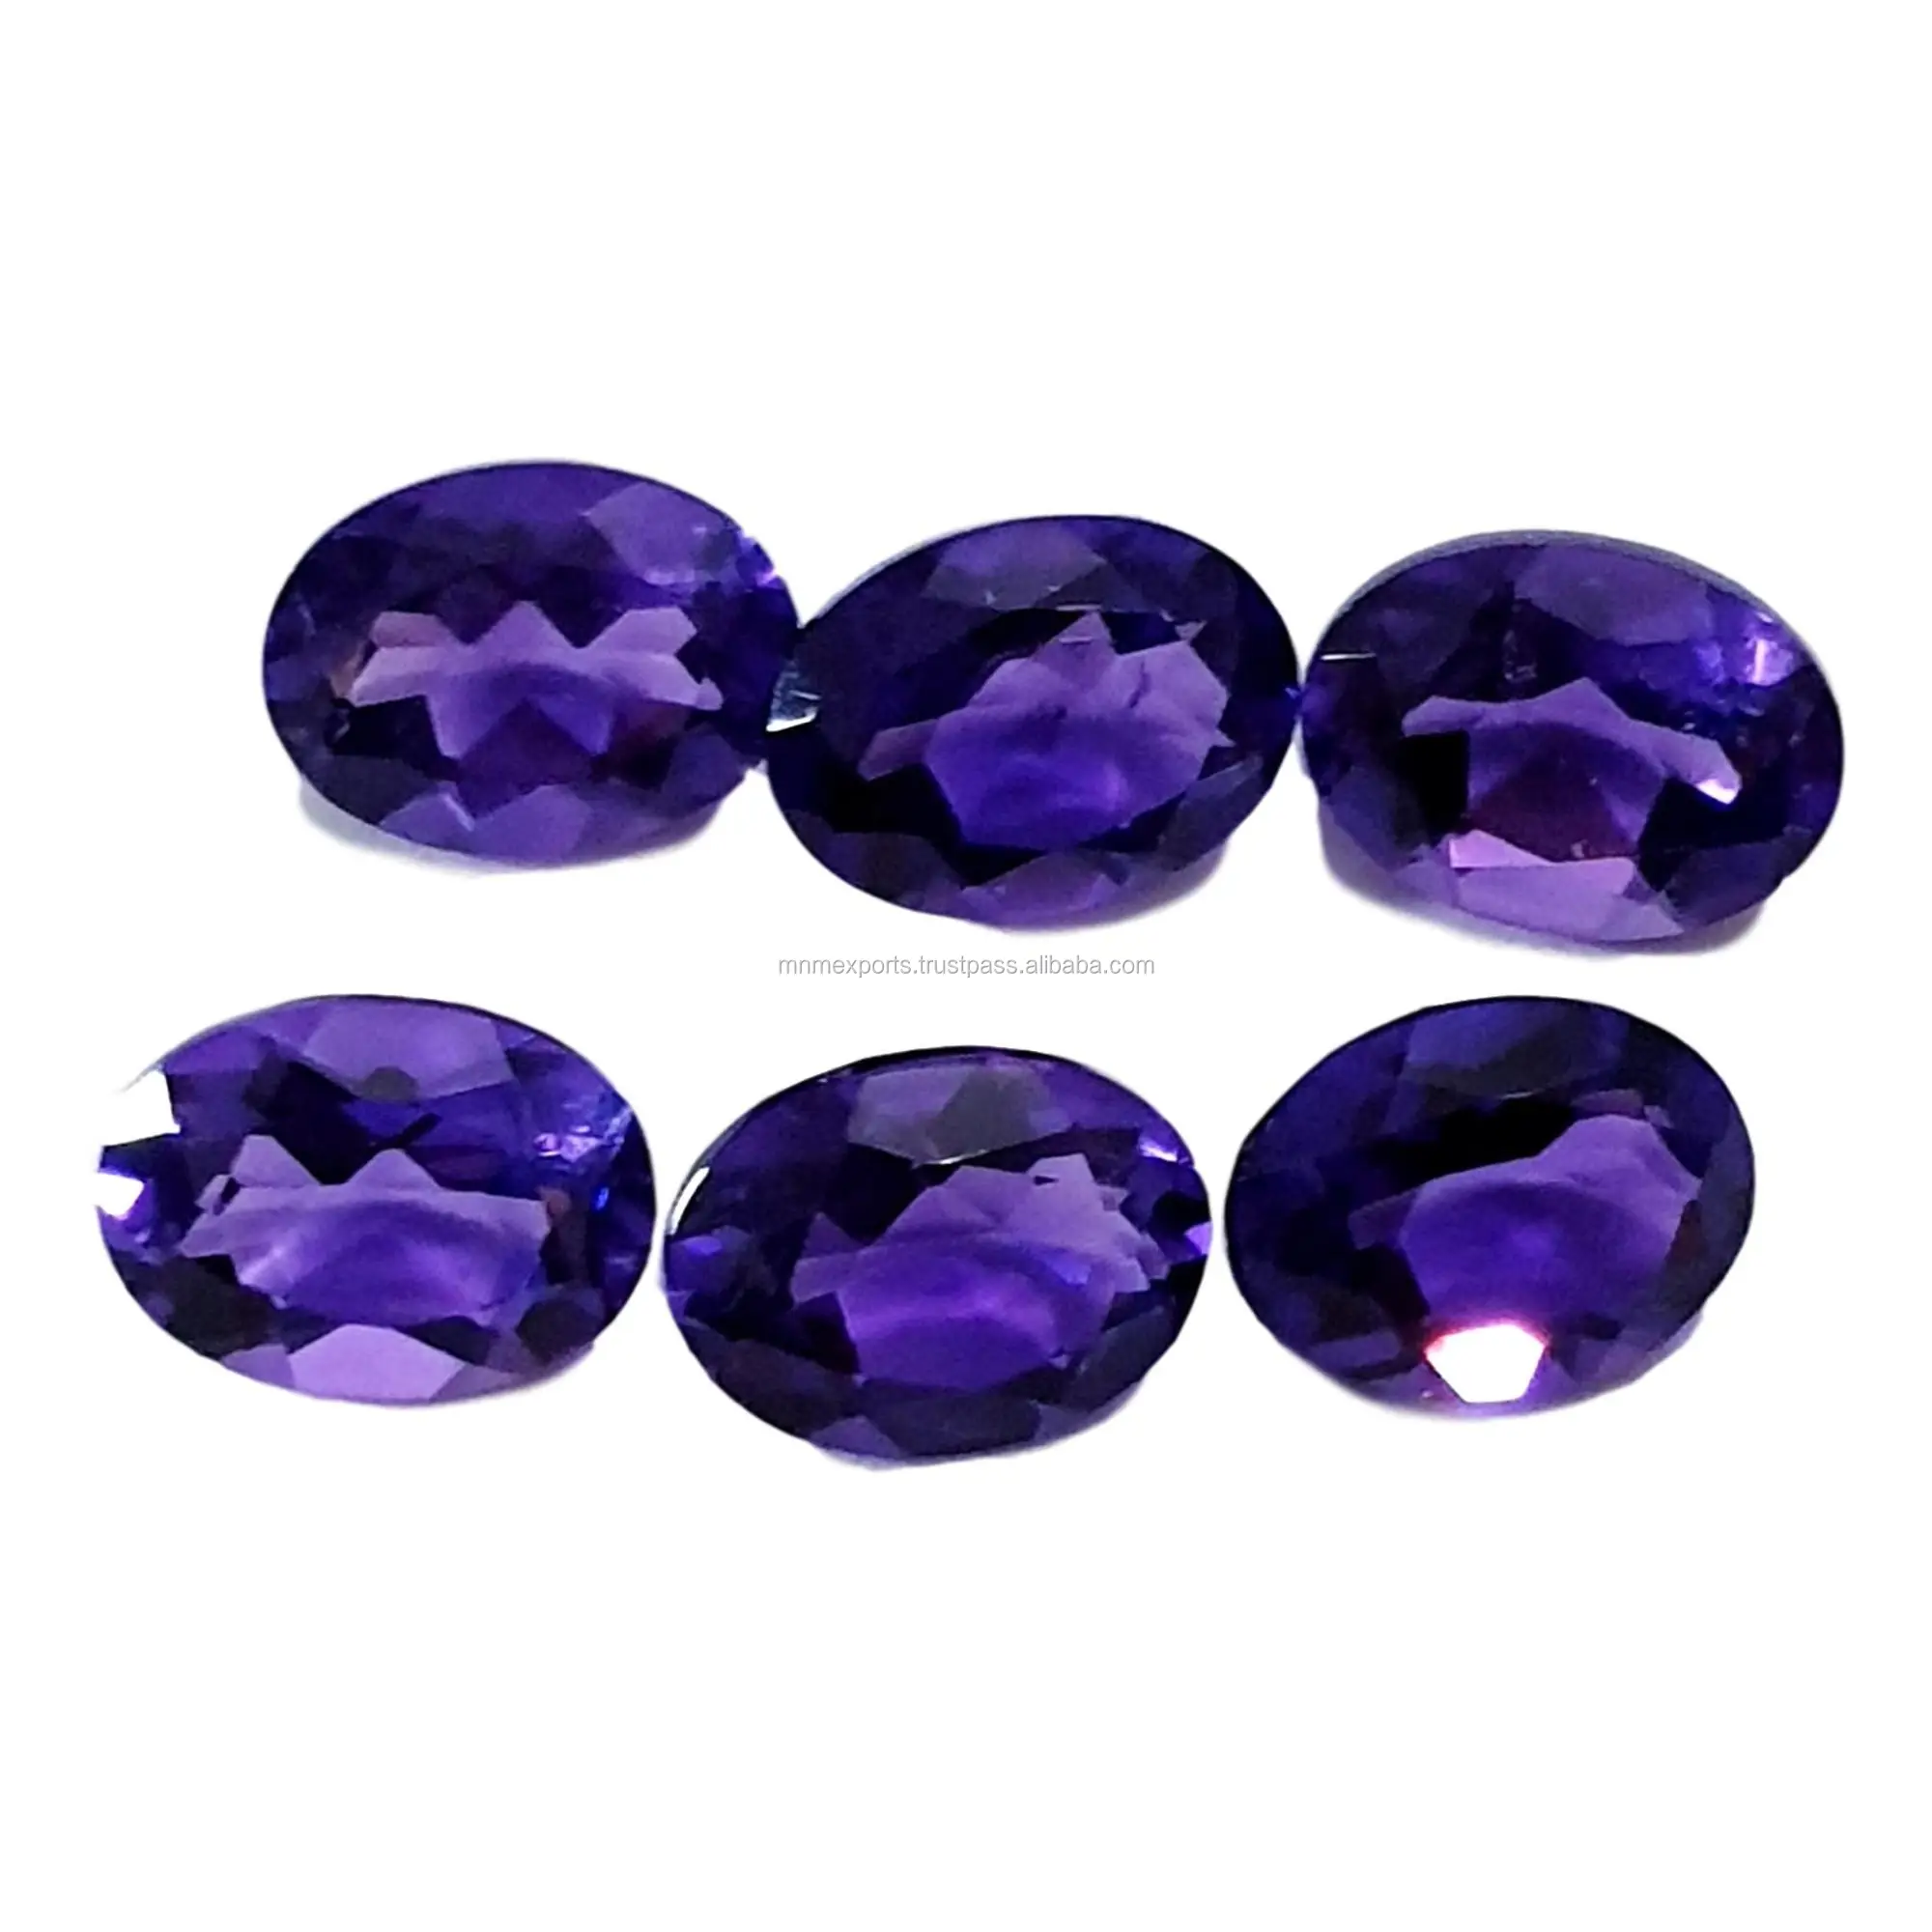 10MM HEART CUT 1PC FACETED LOOSE AAA NATURAL PURPLE AMETHYST GEMSTONE LOT 